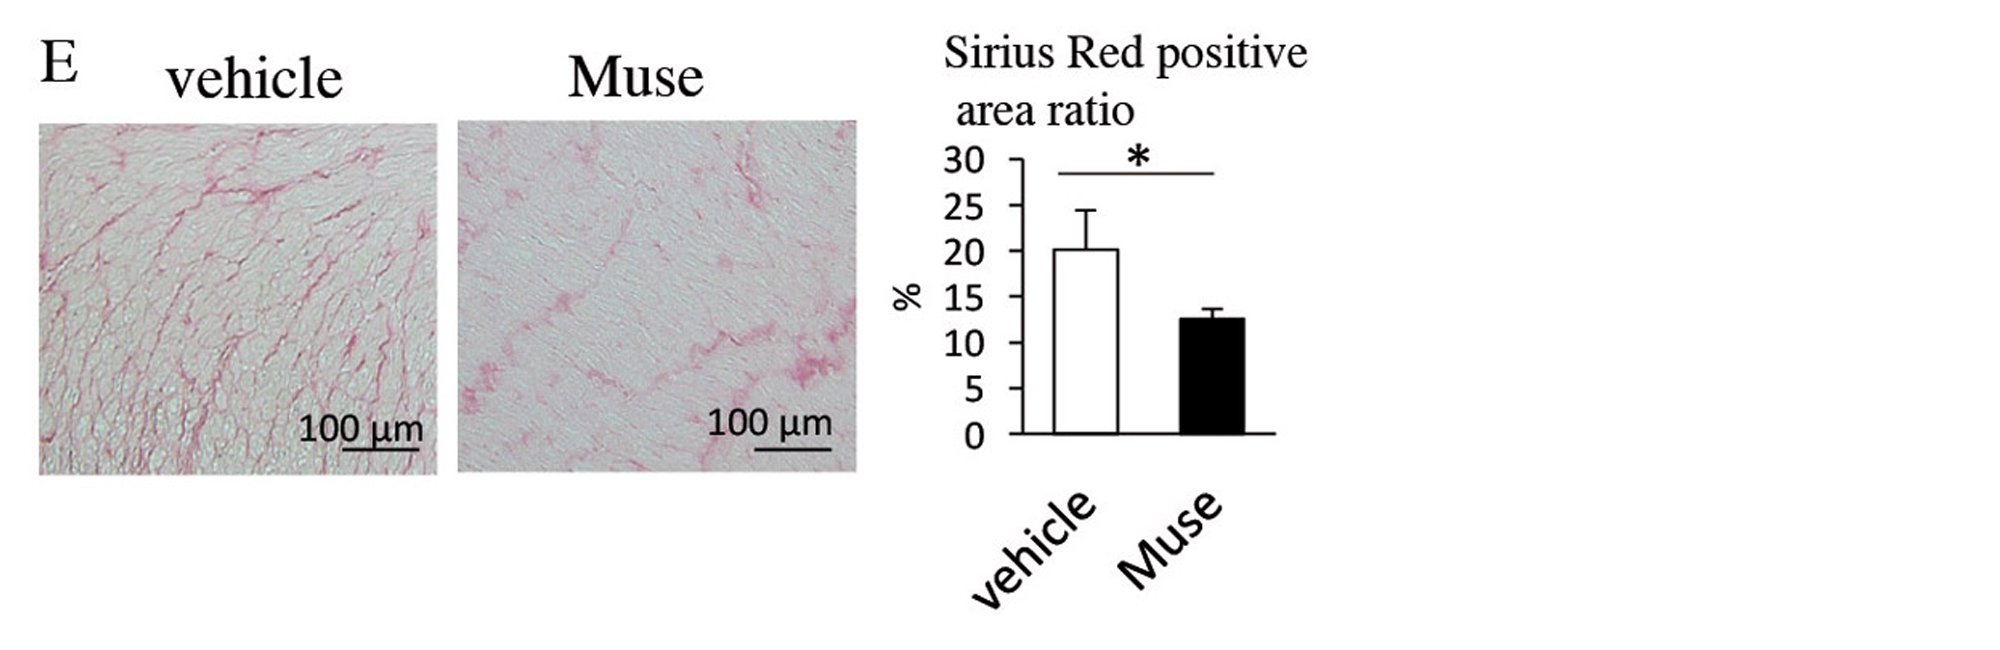 Figure 5. E, Comparison of areas of the Sirius Red-positive region in the infarct regions (vehicle and Muse groups). * p < 0.05; ** p < 0.01; *** p < 0.001; αSMA, α-smooth muscle actin; AMI, acute myocardial infarction; GFP, green fluorescent protein; HGF, hepatocyte growth factor; MMP, matrix metalloproteinase; MSC, mesenchymal stem cell; TUNEL, terminal deoxynucleotidyl transferase dUTP nick-end labelling; VEGF, vascular endothelial growth factor.